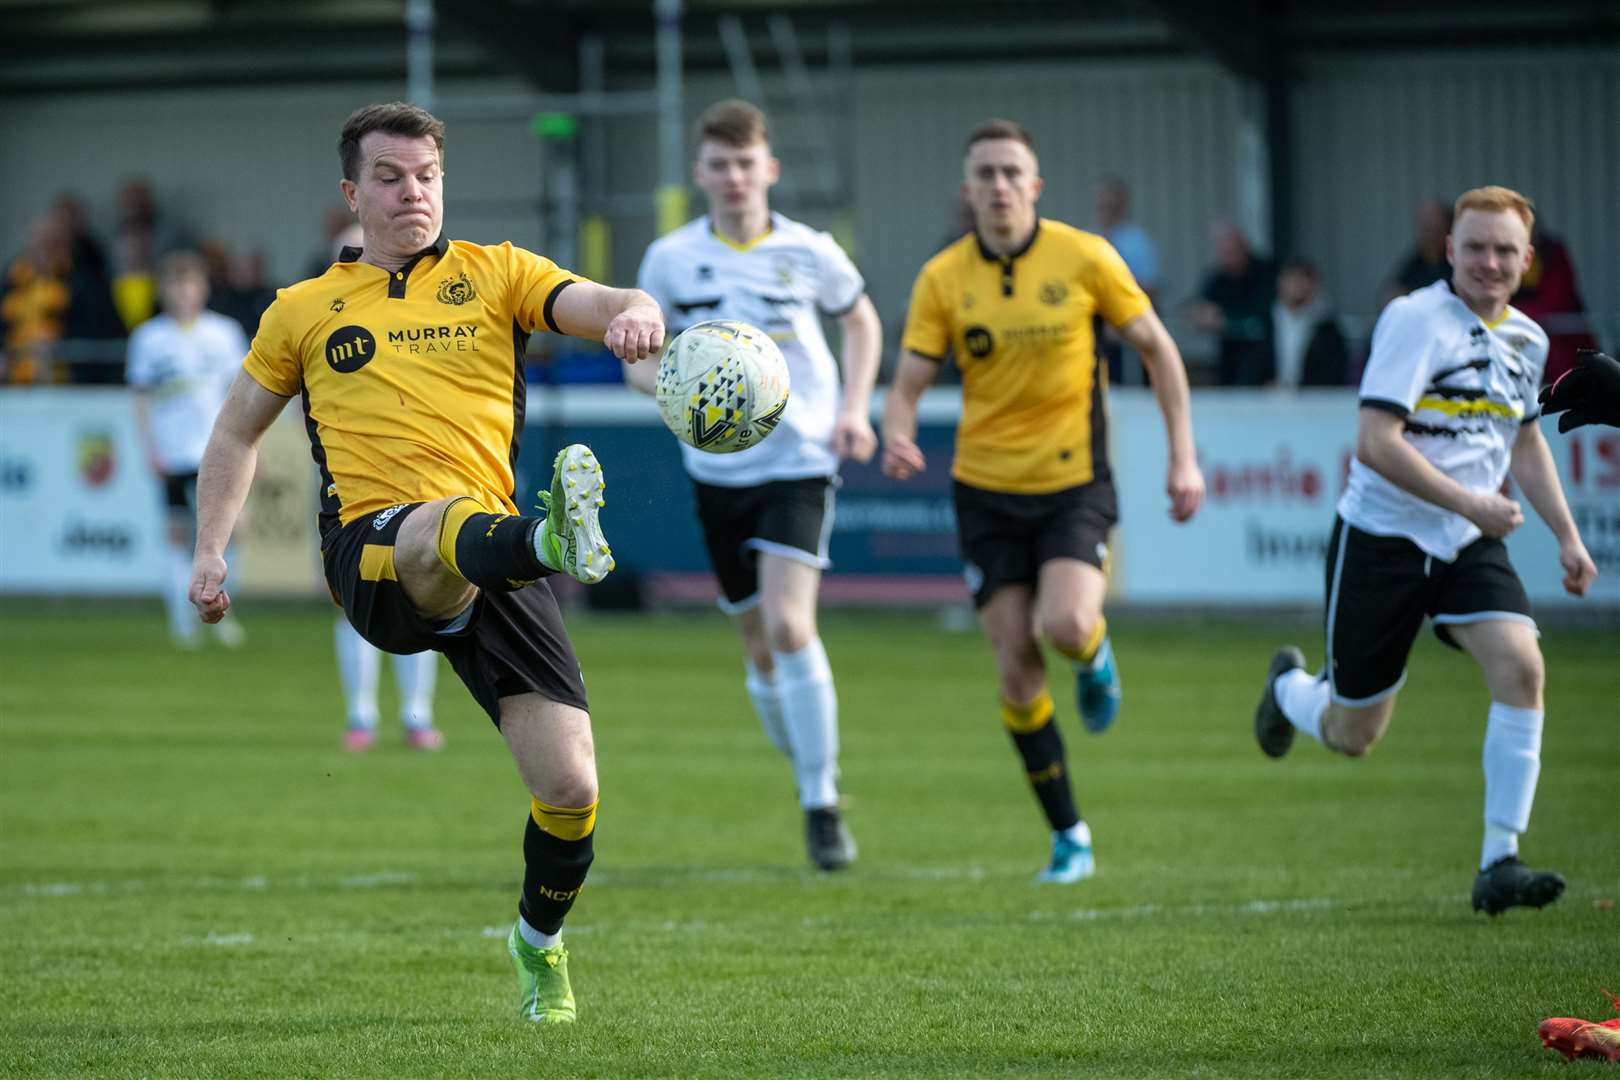 Conor Gethins scored the winning goal for Nairn County against new side Clachnacuddin last time the teams met, in April. Picture: Callum Mackay